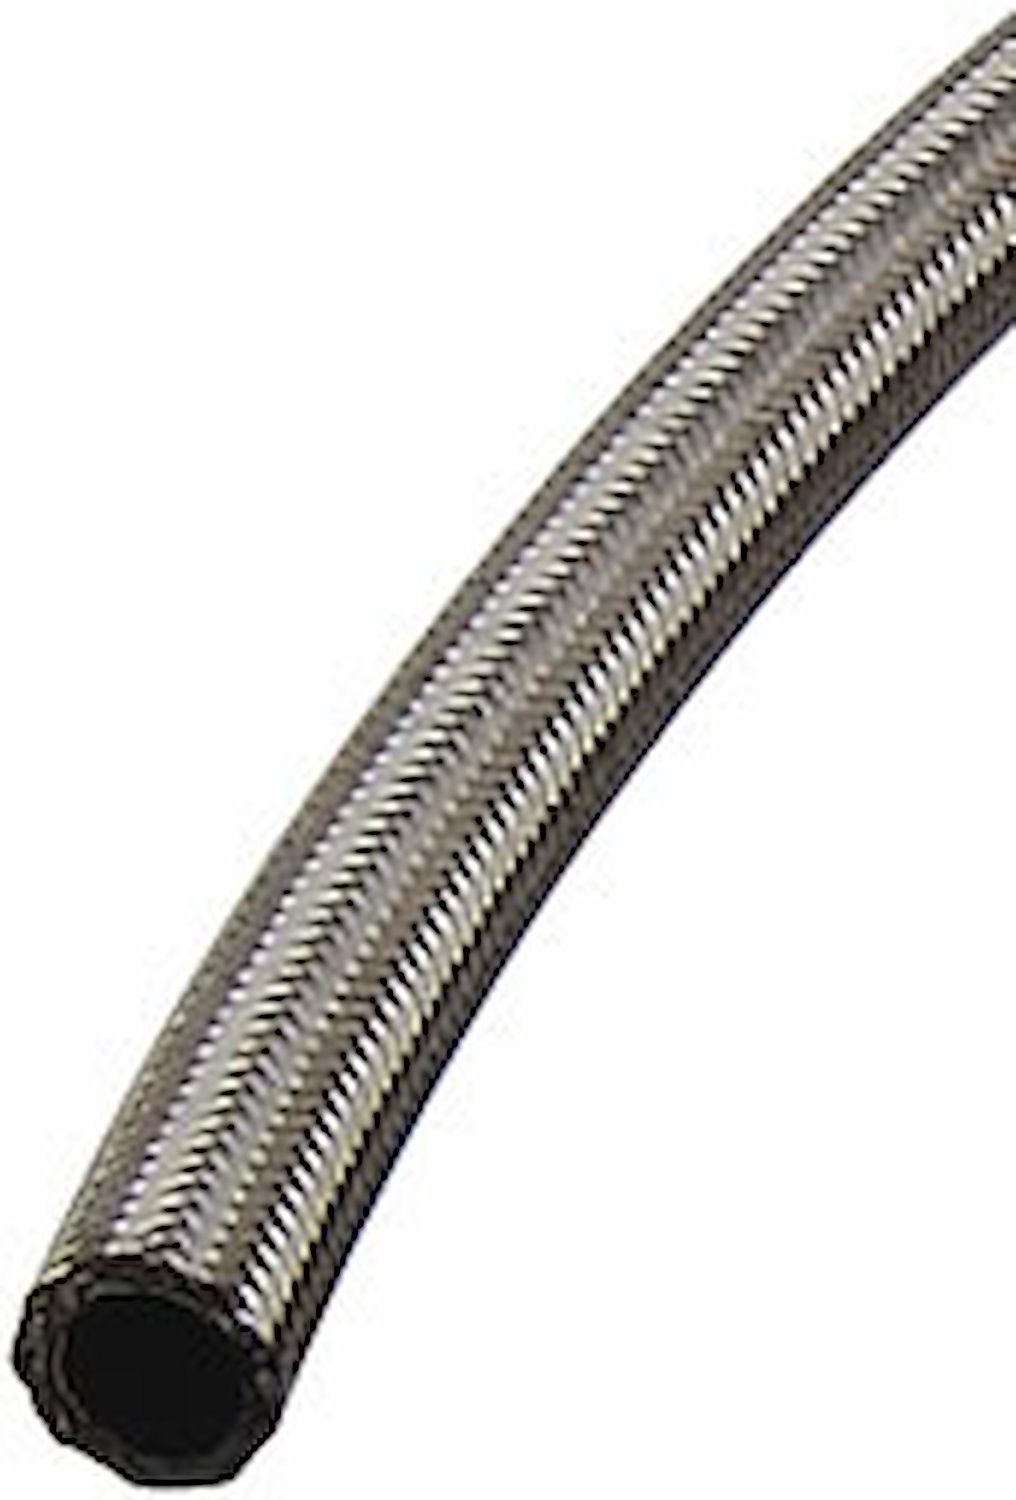 Pro-Flo 200 Series Stainless Steel Braided Hose -12 AN [10 ft.]